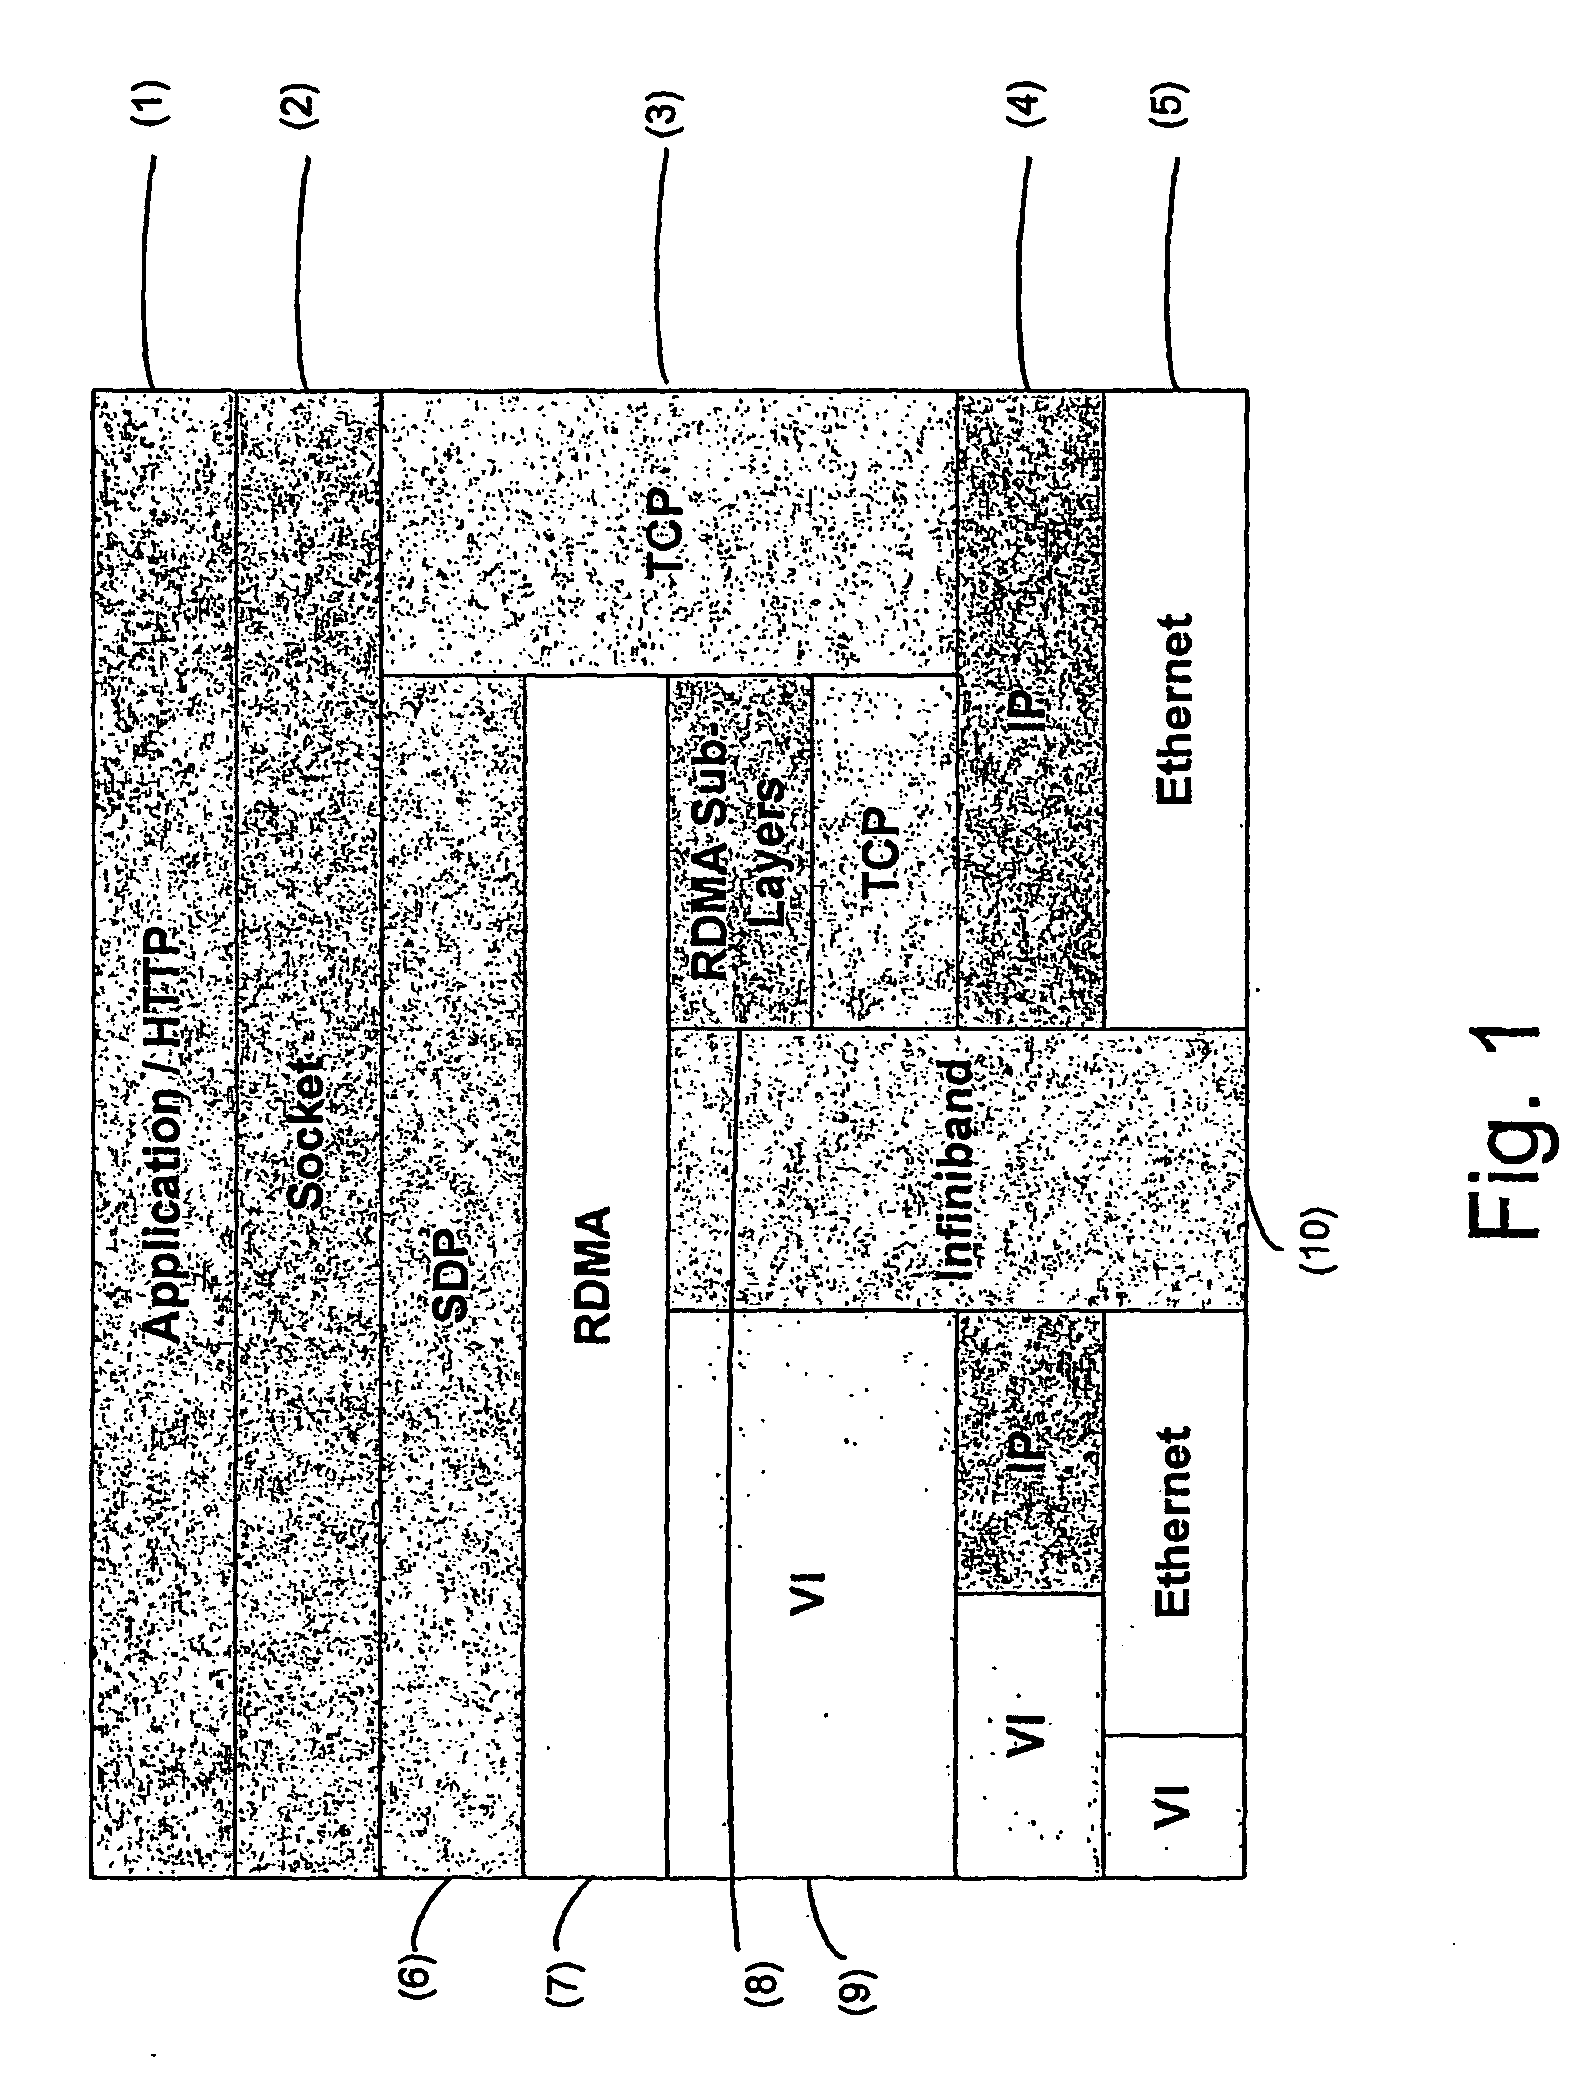 System and method for managing multiple connections to a server